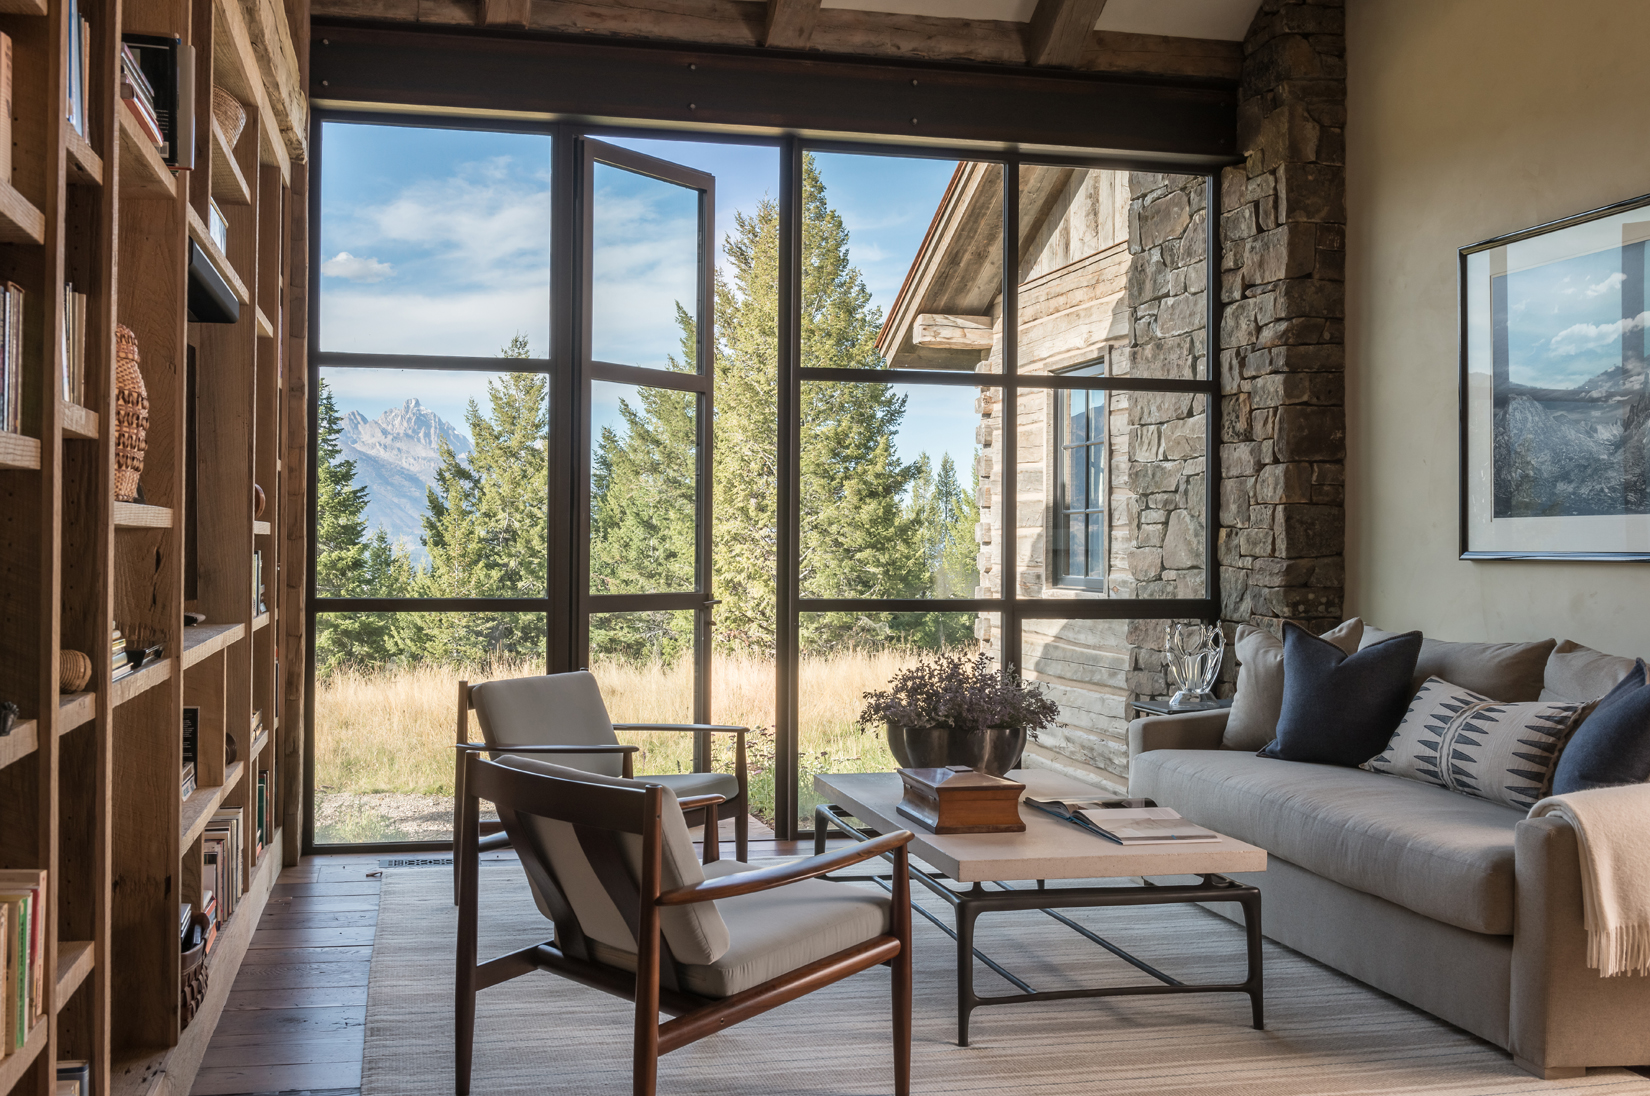 An interior featured in Rhapsody was also an award-winning project for WRJ Design that earned the firm the “Home of the Year” award in Mountain Living magazine (photo: Audrey Hall).